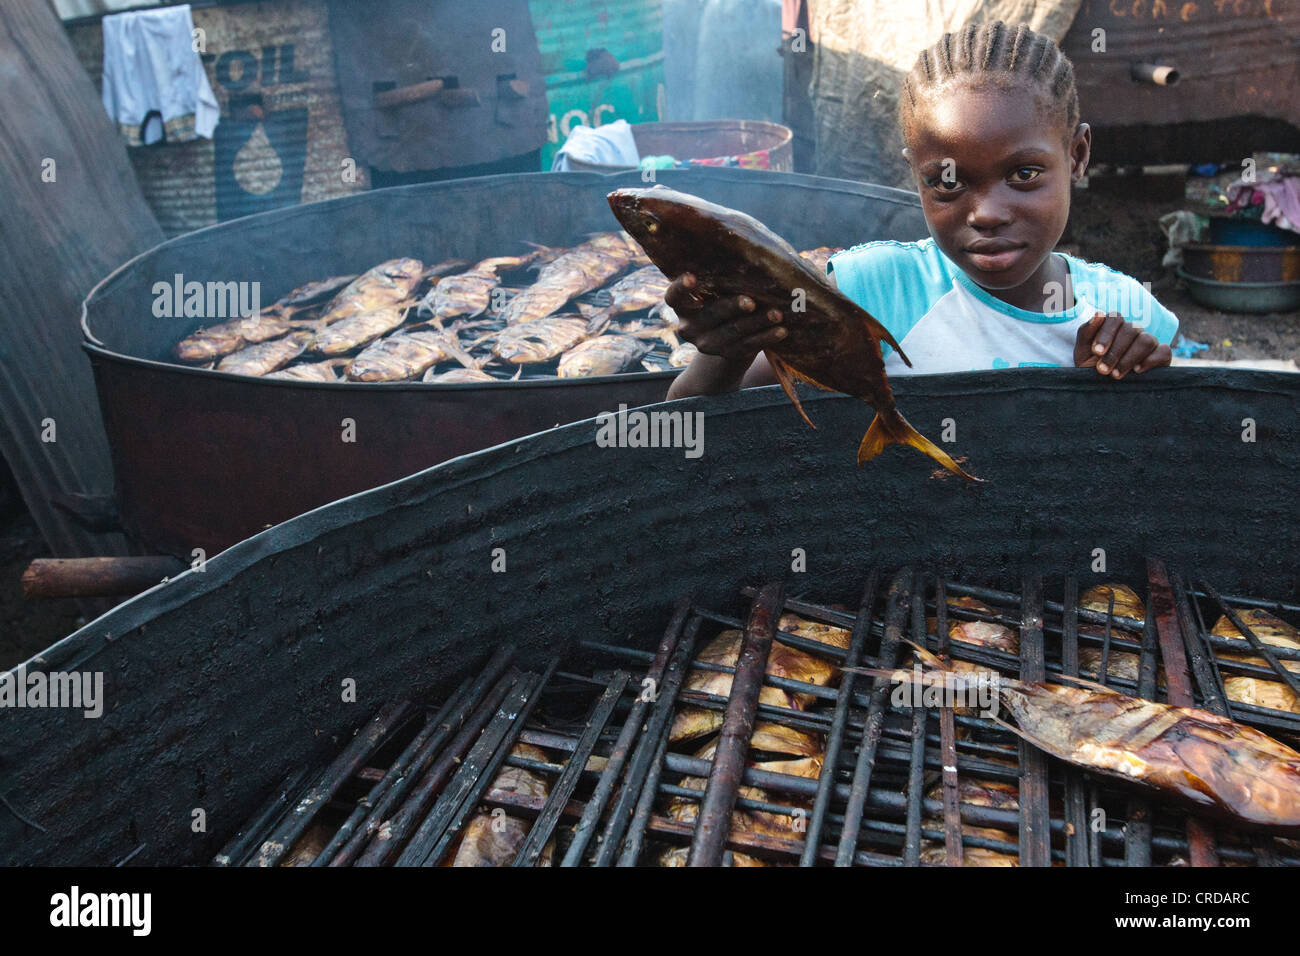 A girl picks up a large smoked fish in the West Point slum of Monrovia, Montserrado county, Liberia on Monday April 2, 2012. Stock Photo